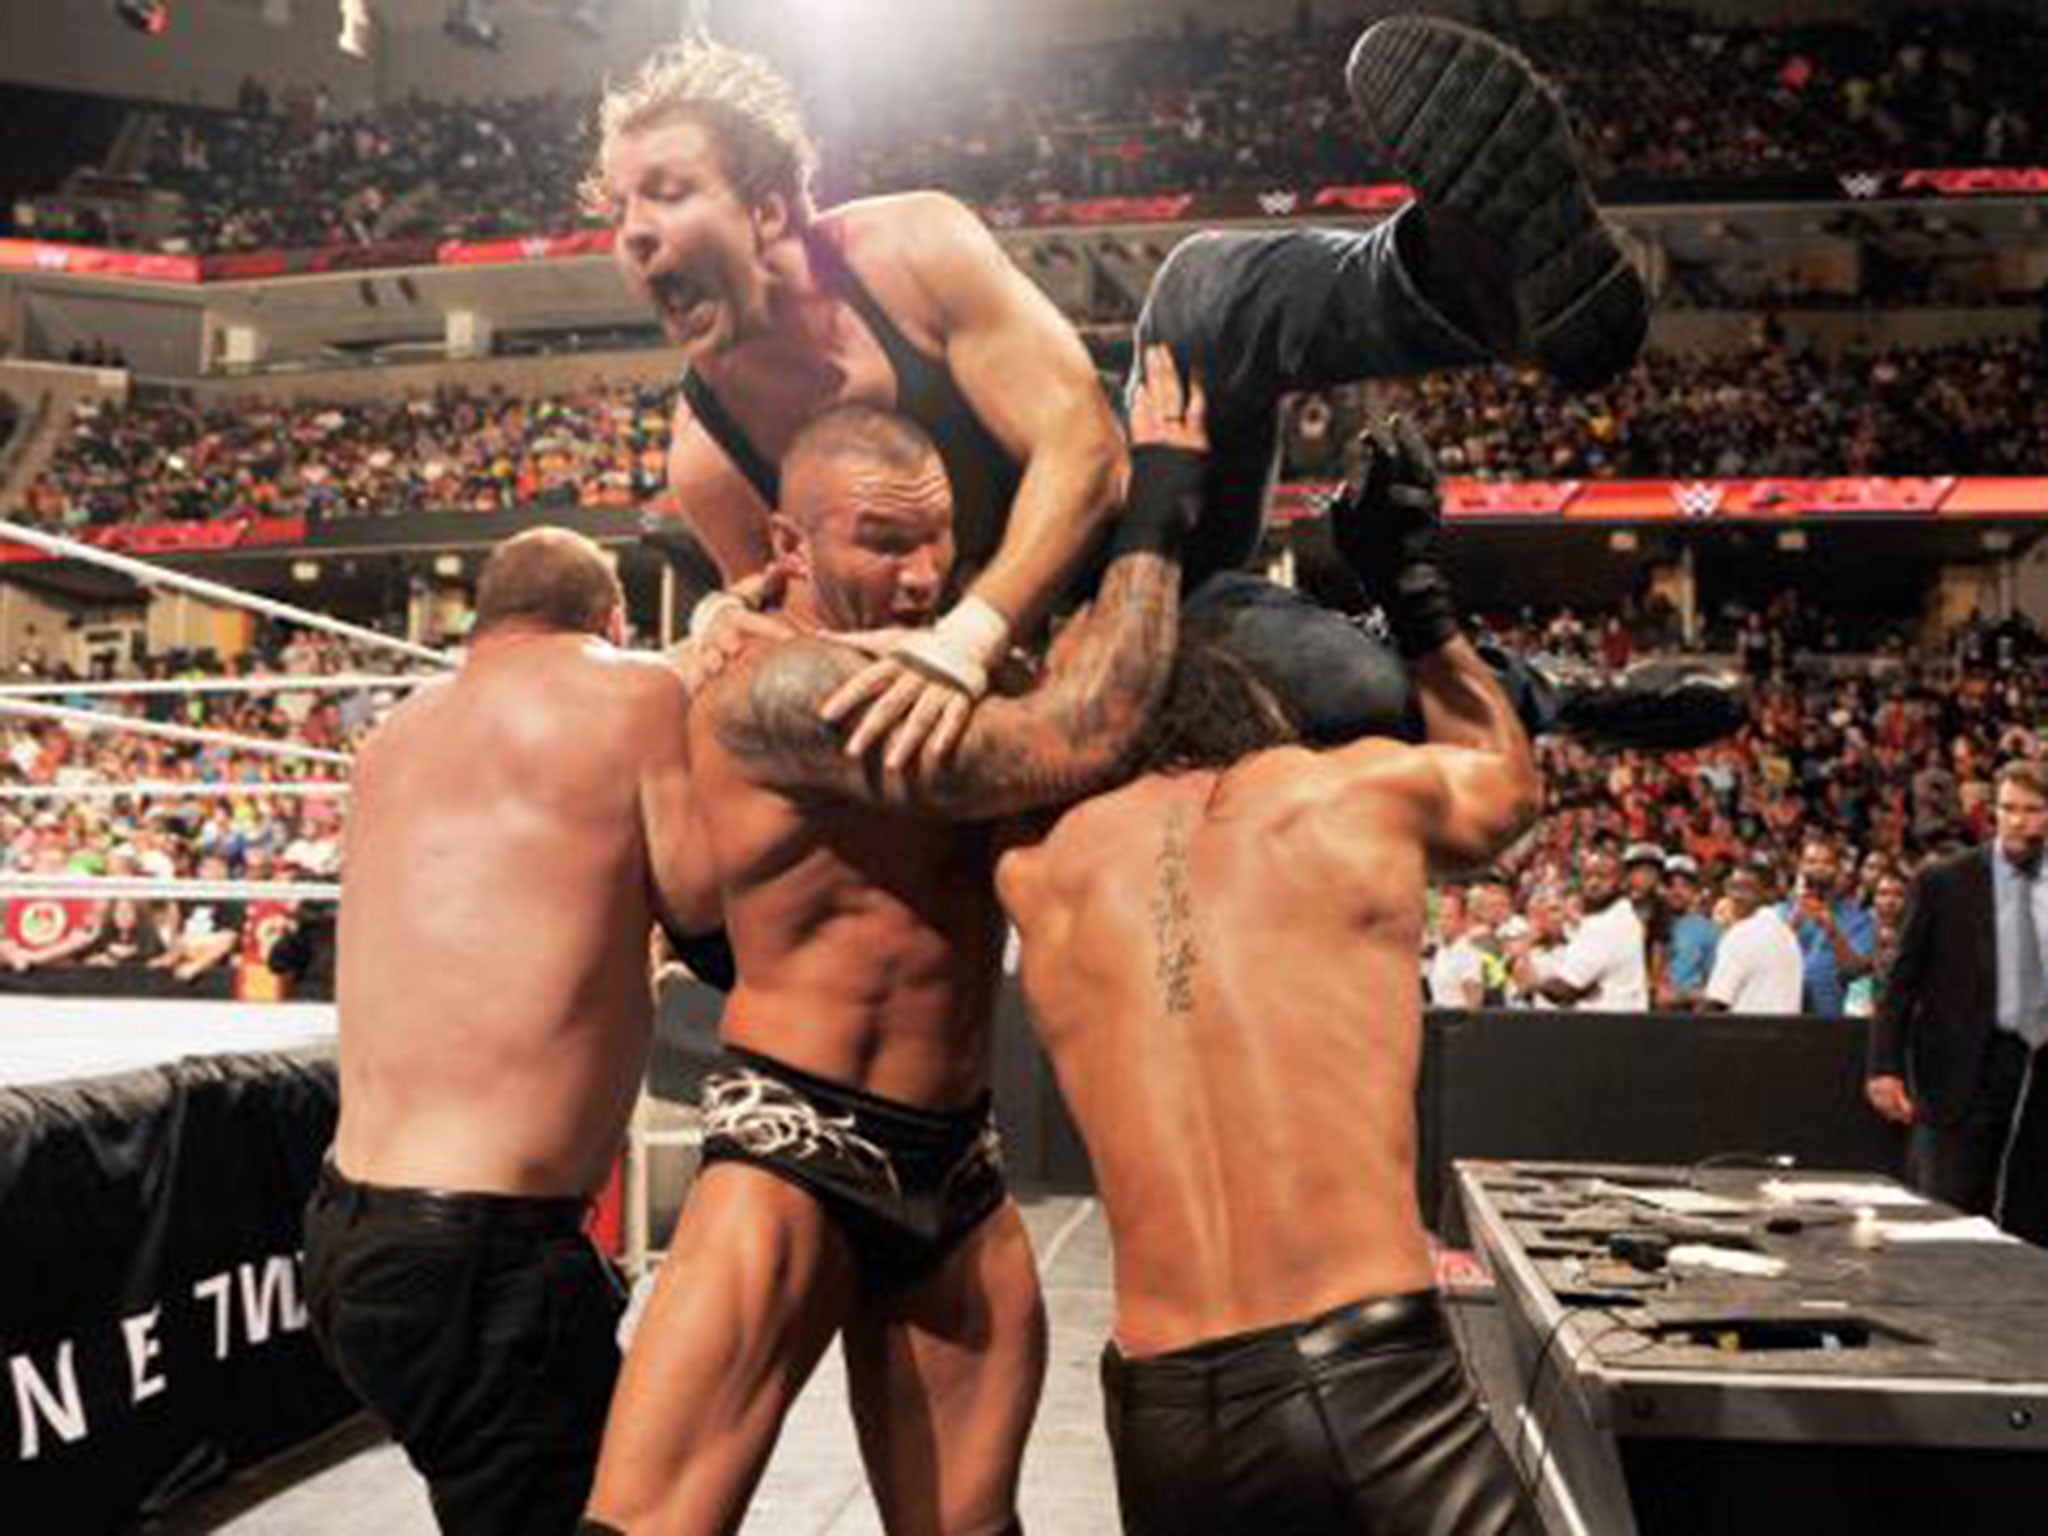 Dean Ambrose launches himself into Kane, Randy Orton and Seth Rollins